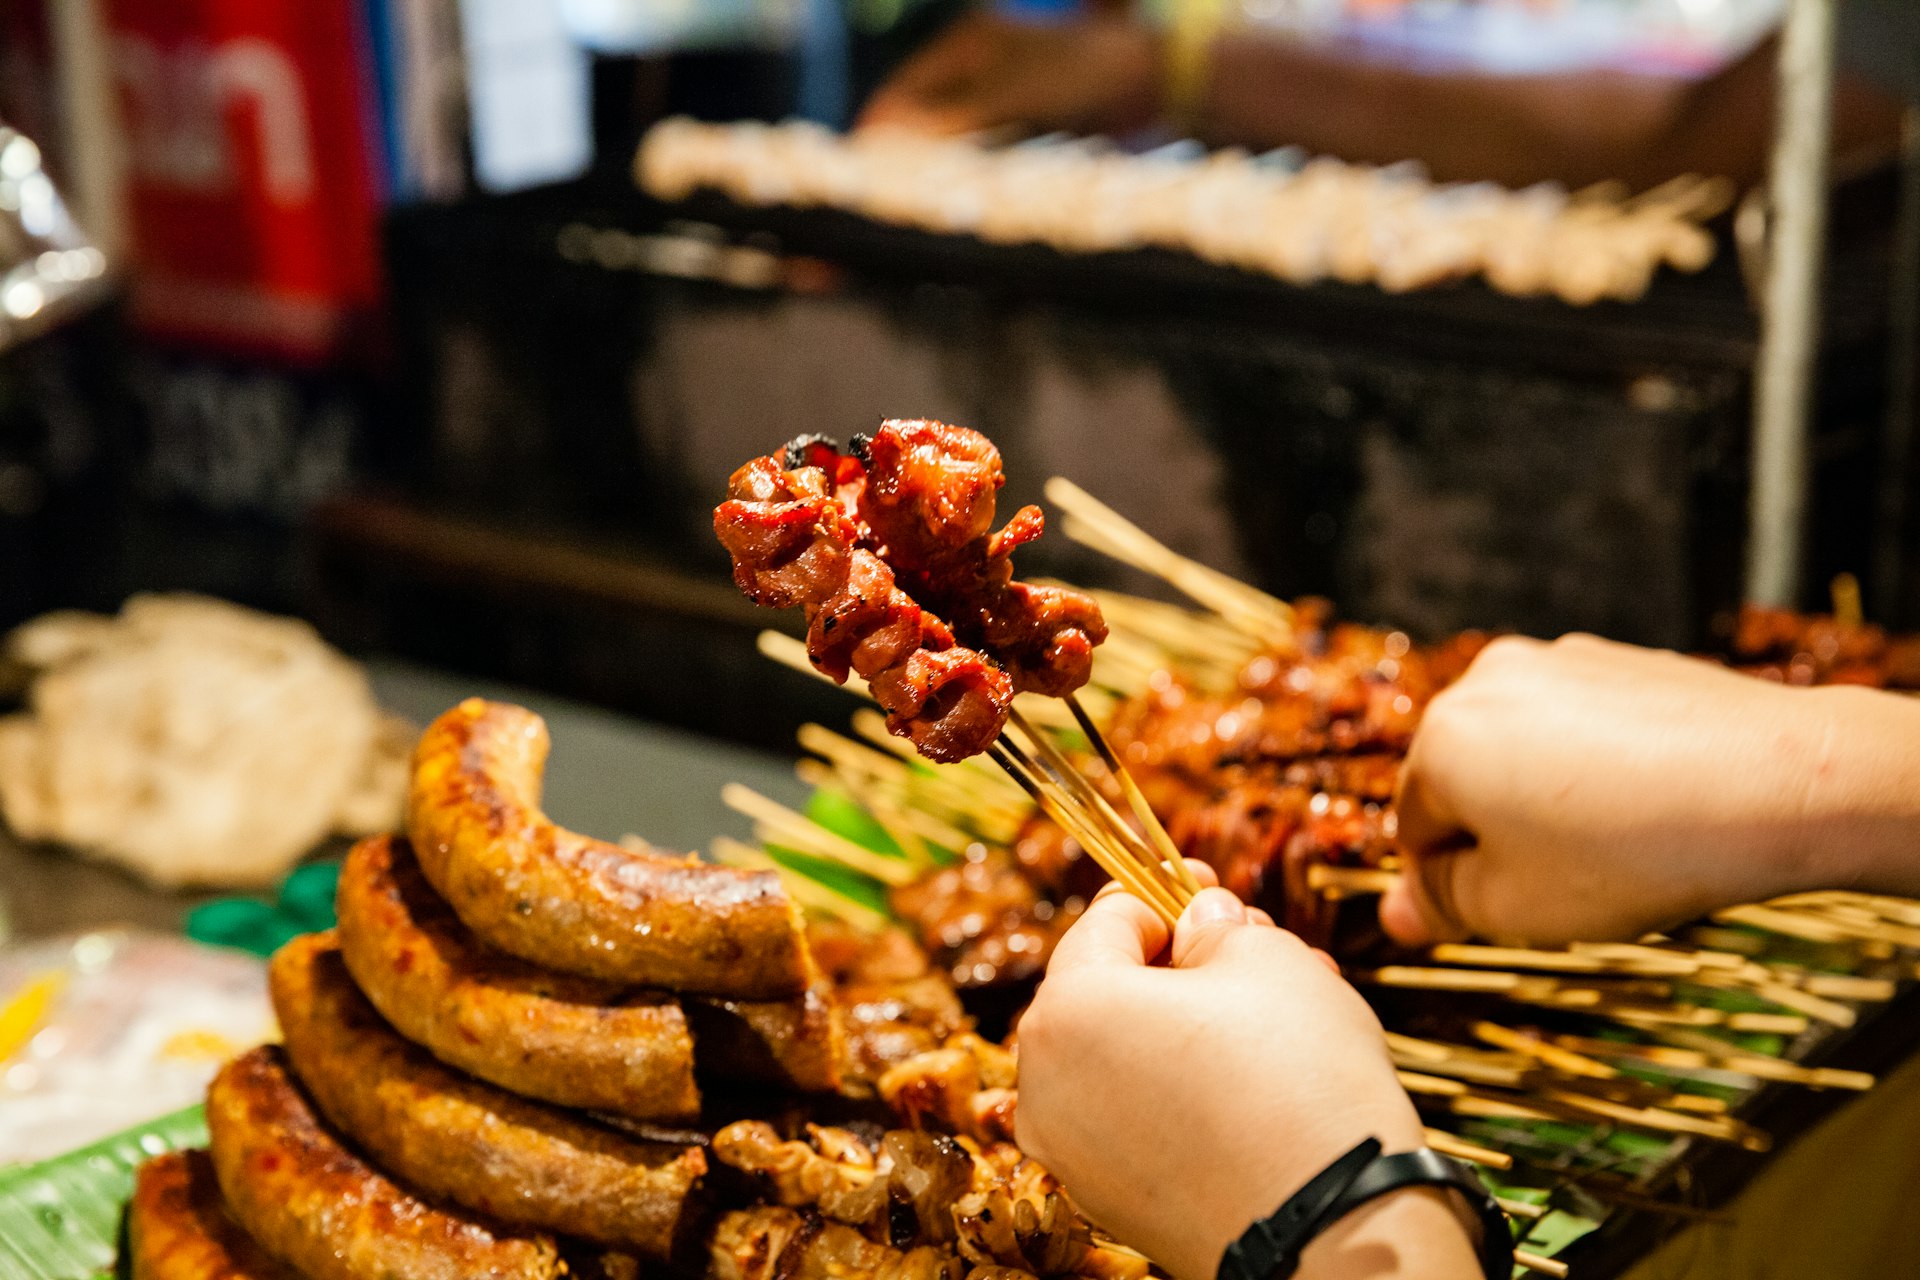 Hands holding meat skewers at a market stall in Chiang Mai, Thailand